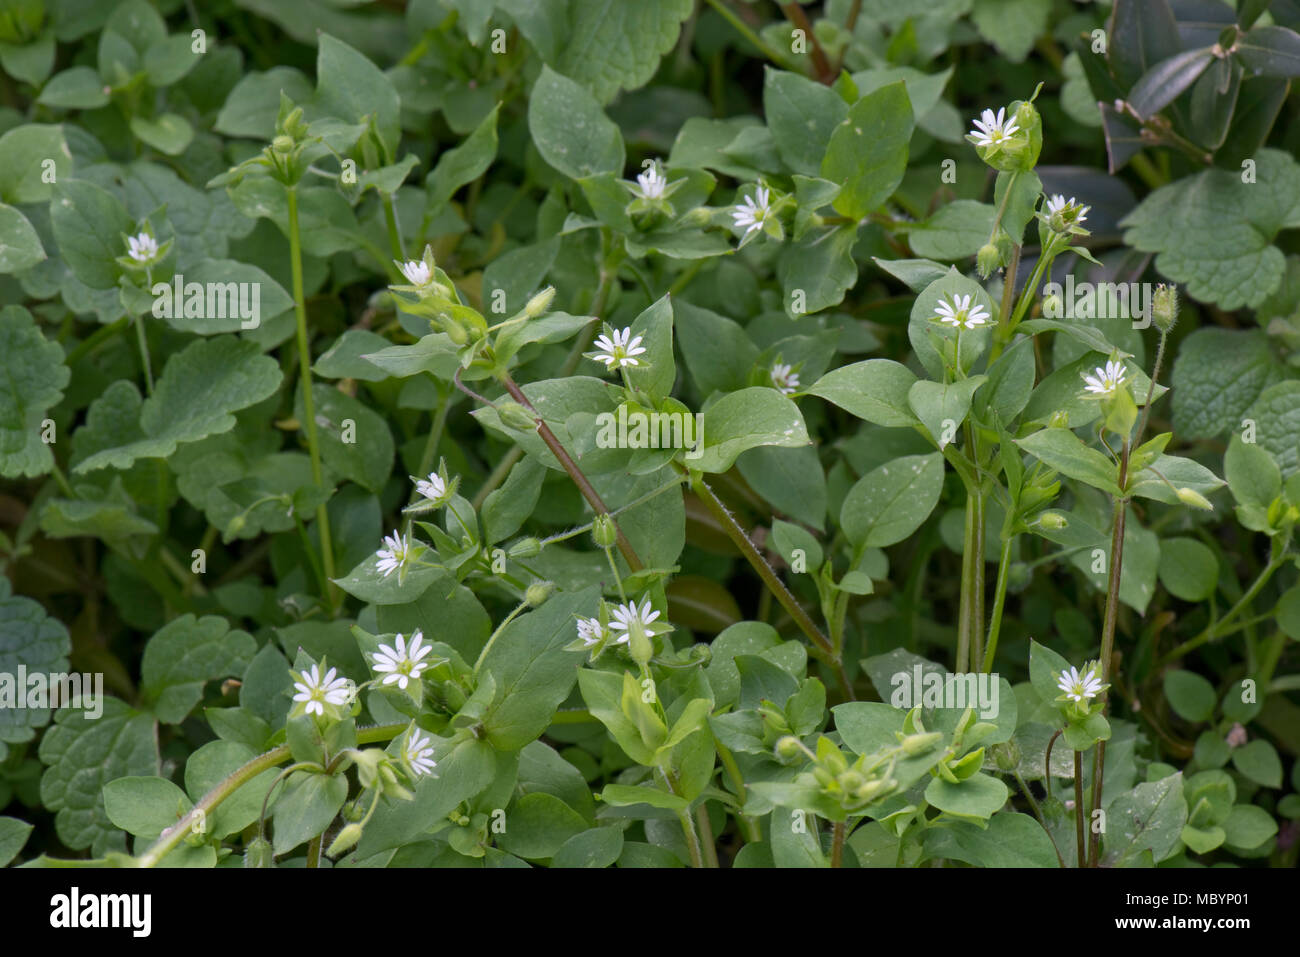 Chickweed, Stellaria media, flowering in early spring, an important weed of gardens and agricultural crops Stock Photo